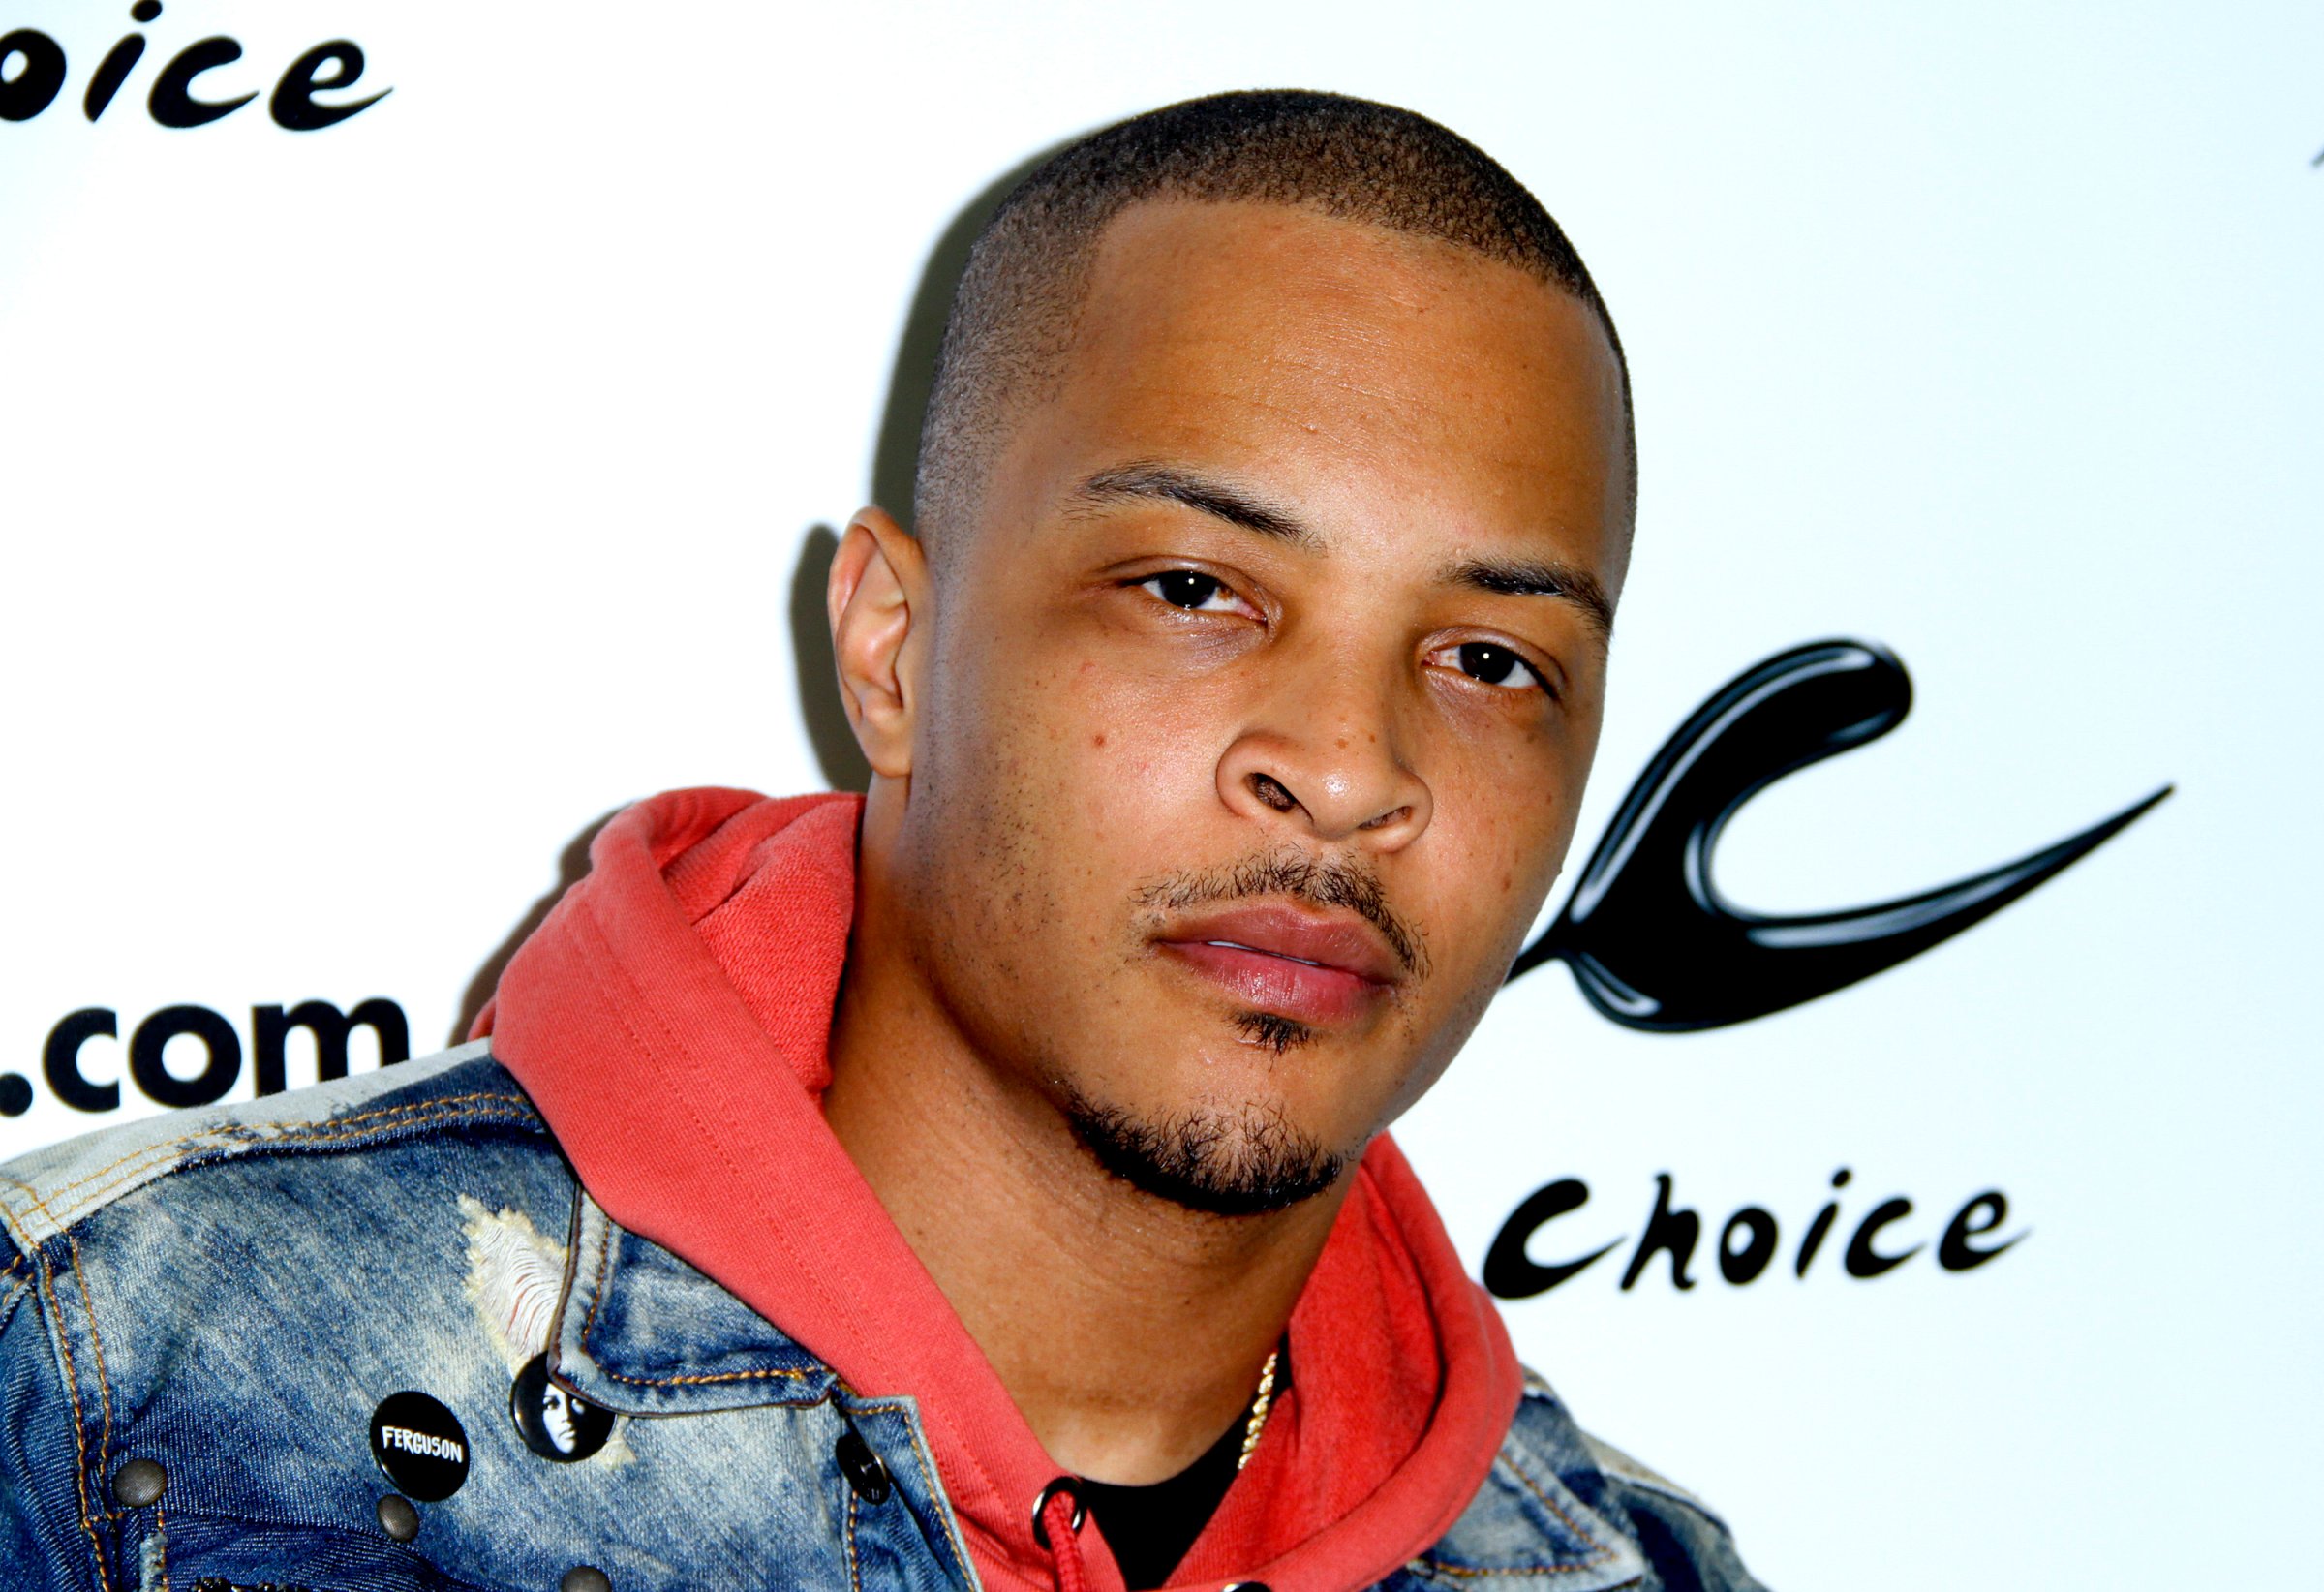 Rapper T.I. visits Music Choice in New York City on April 15, 2016.